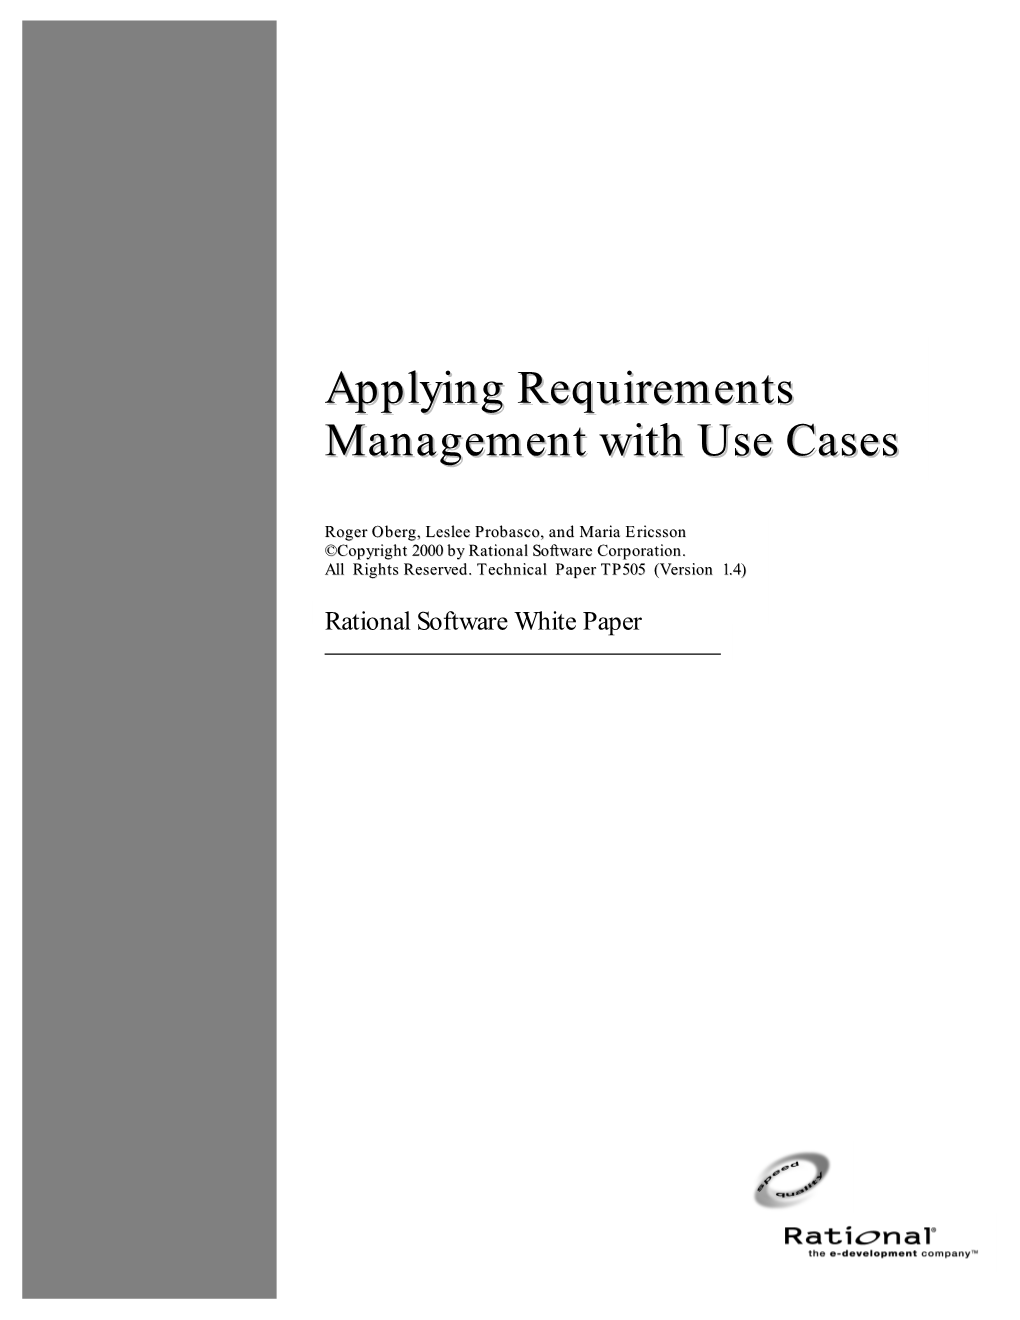 Applying Requirements Management with Use Cases